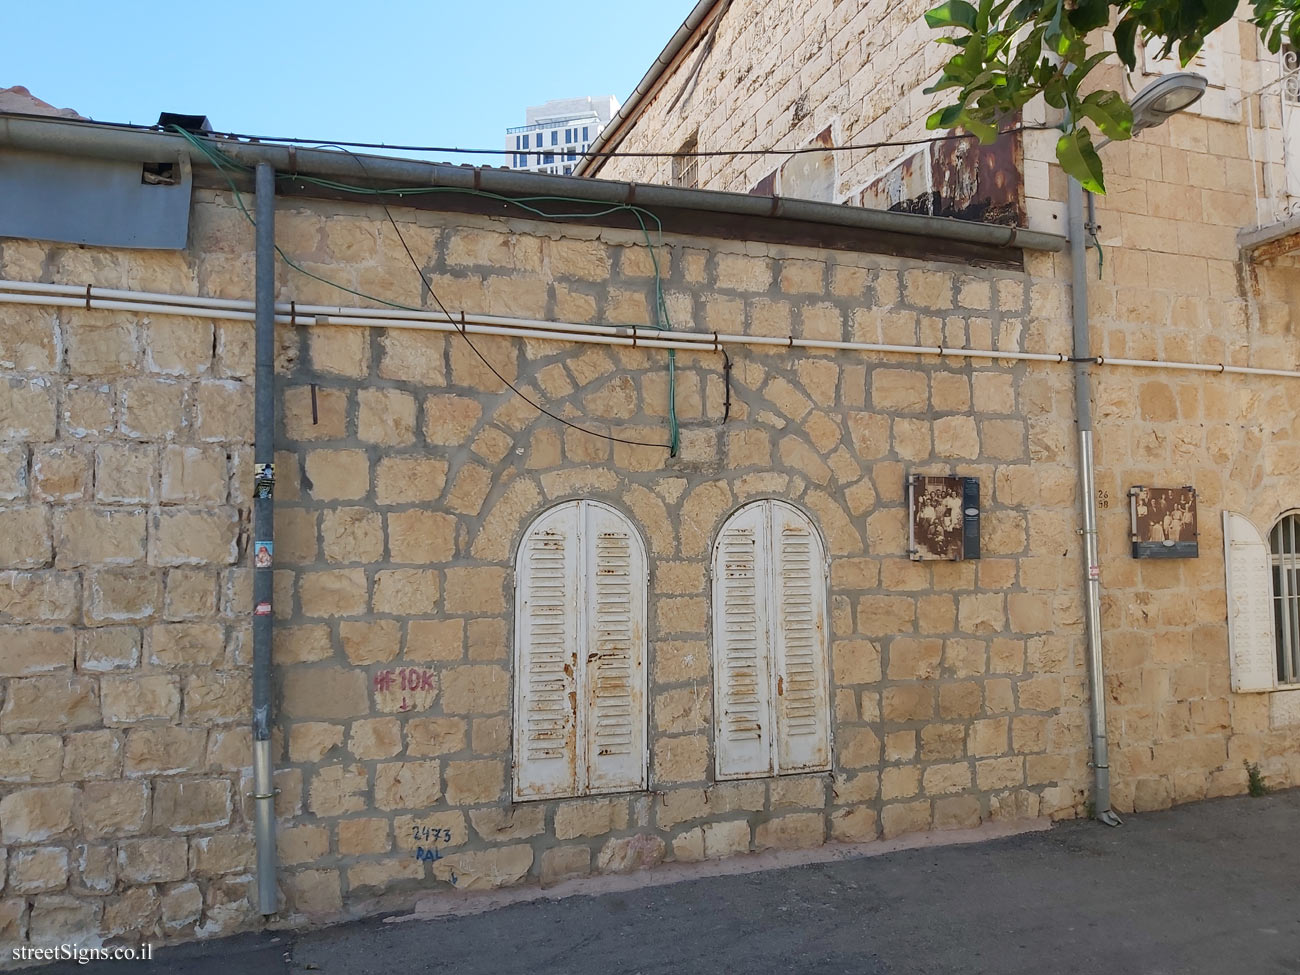 Jerusalem - Photograph in stone - The Family of Daniel and Bechora Levy - Ohel Moshe St 1, Jerusalem, Israel